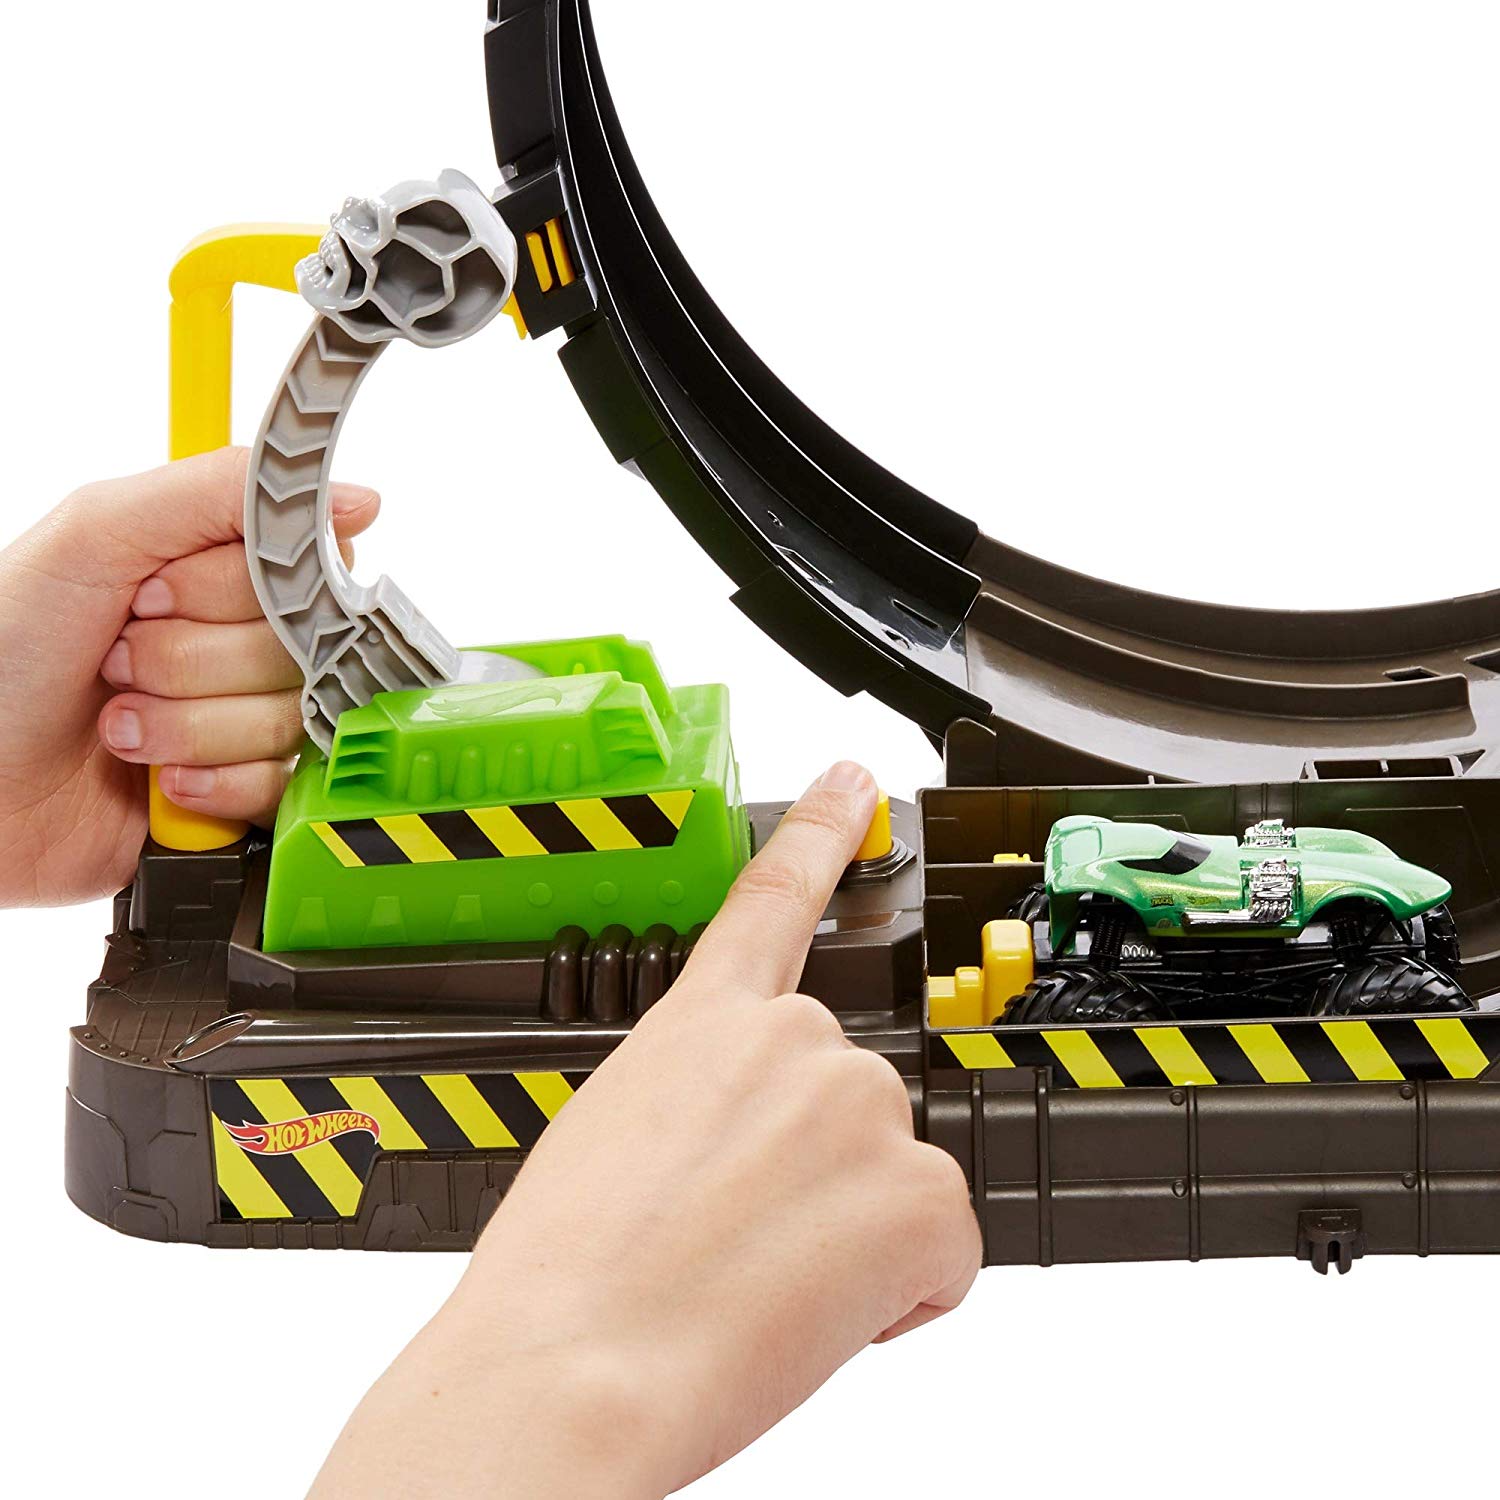 Hot Wheels Monster Truck Epic Loop Challenge Play Set with Truck and C –  Square Imports